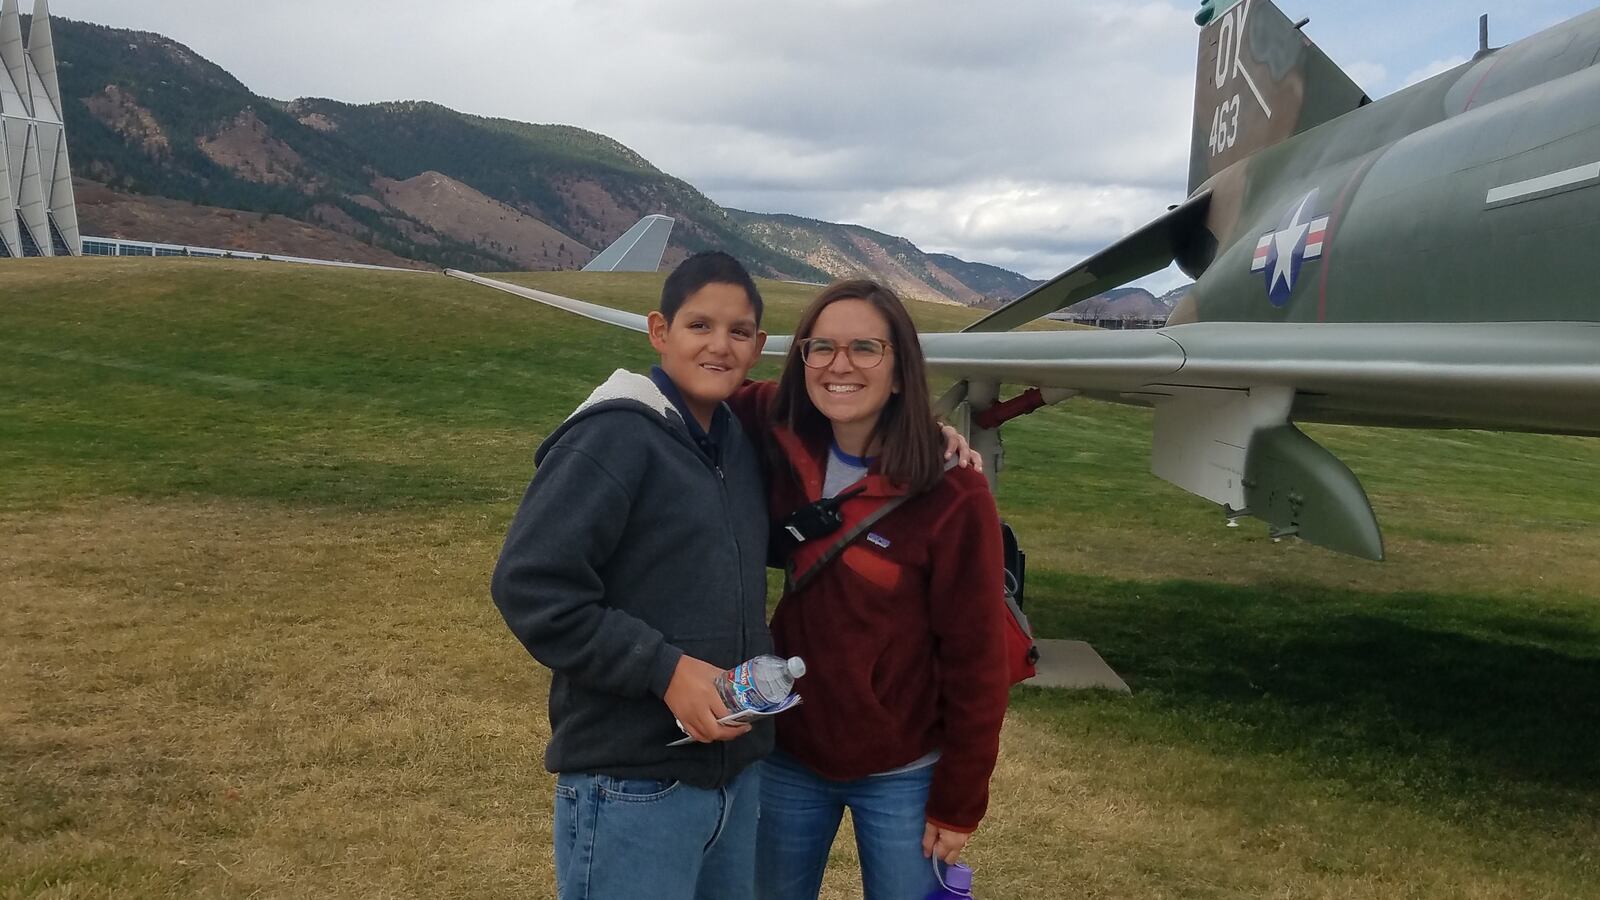 Wendi Sussman, a teacher at STRIVE Prep - Federal in Denver, with an eighth-grade student during a field trip to the Air Force Academy.